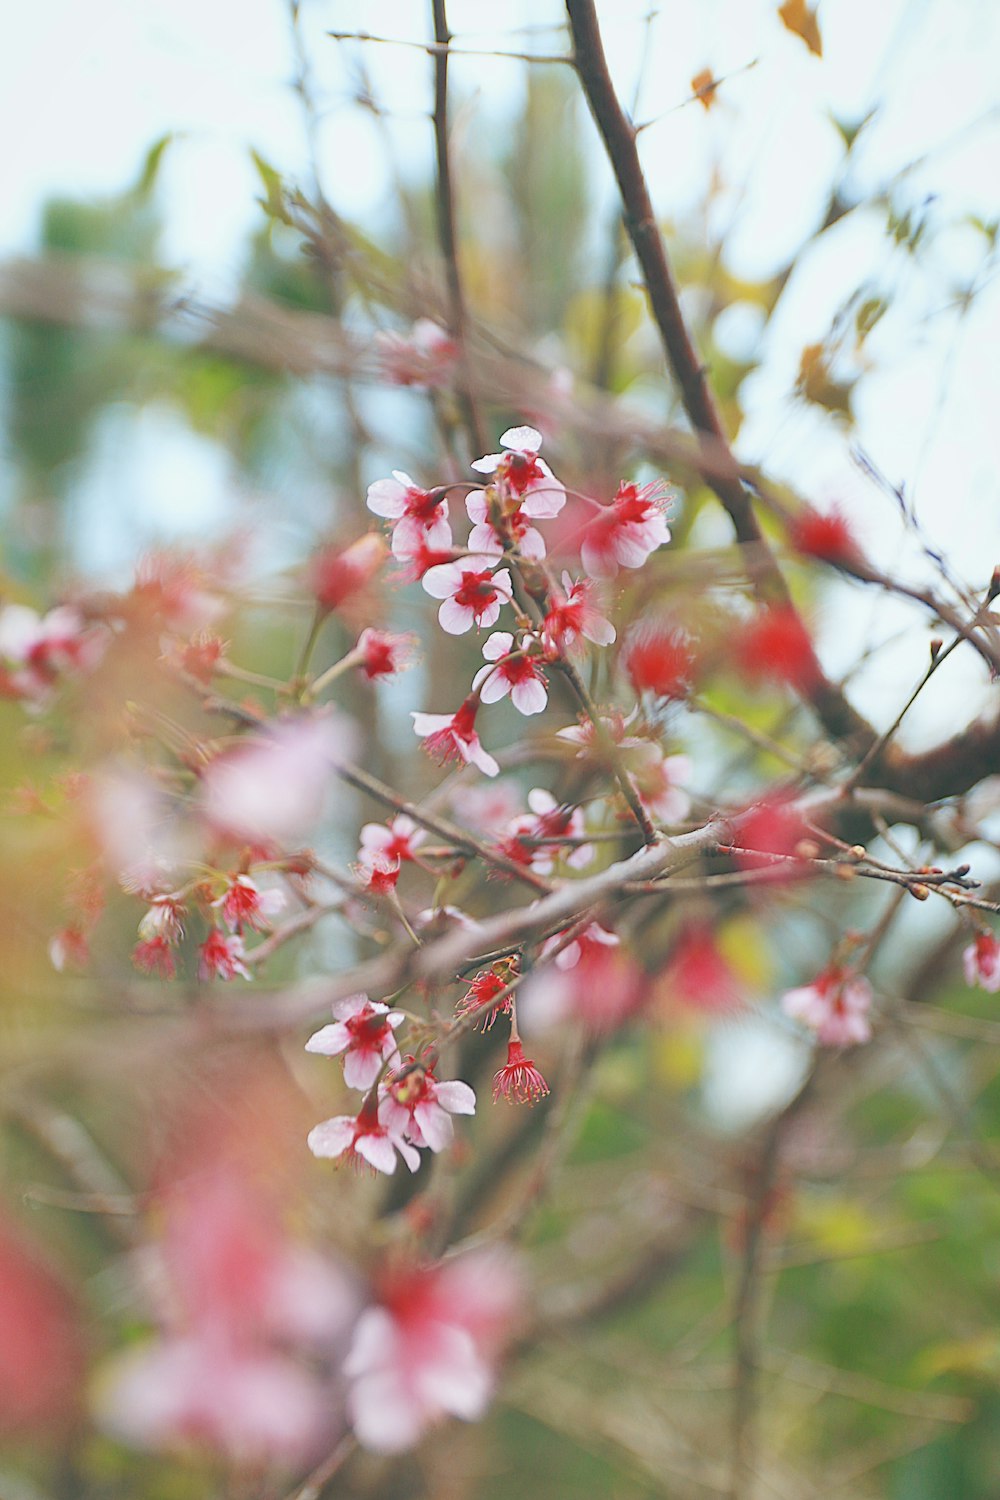 a close up of a tree with red and white flowers